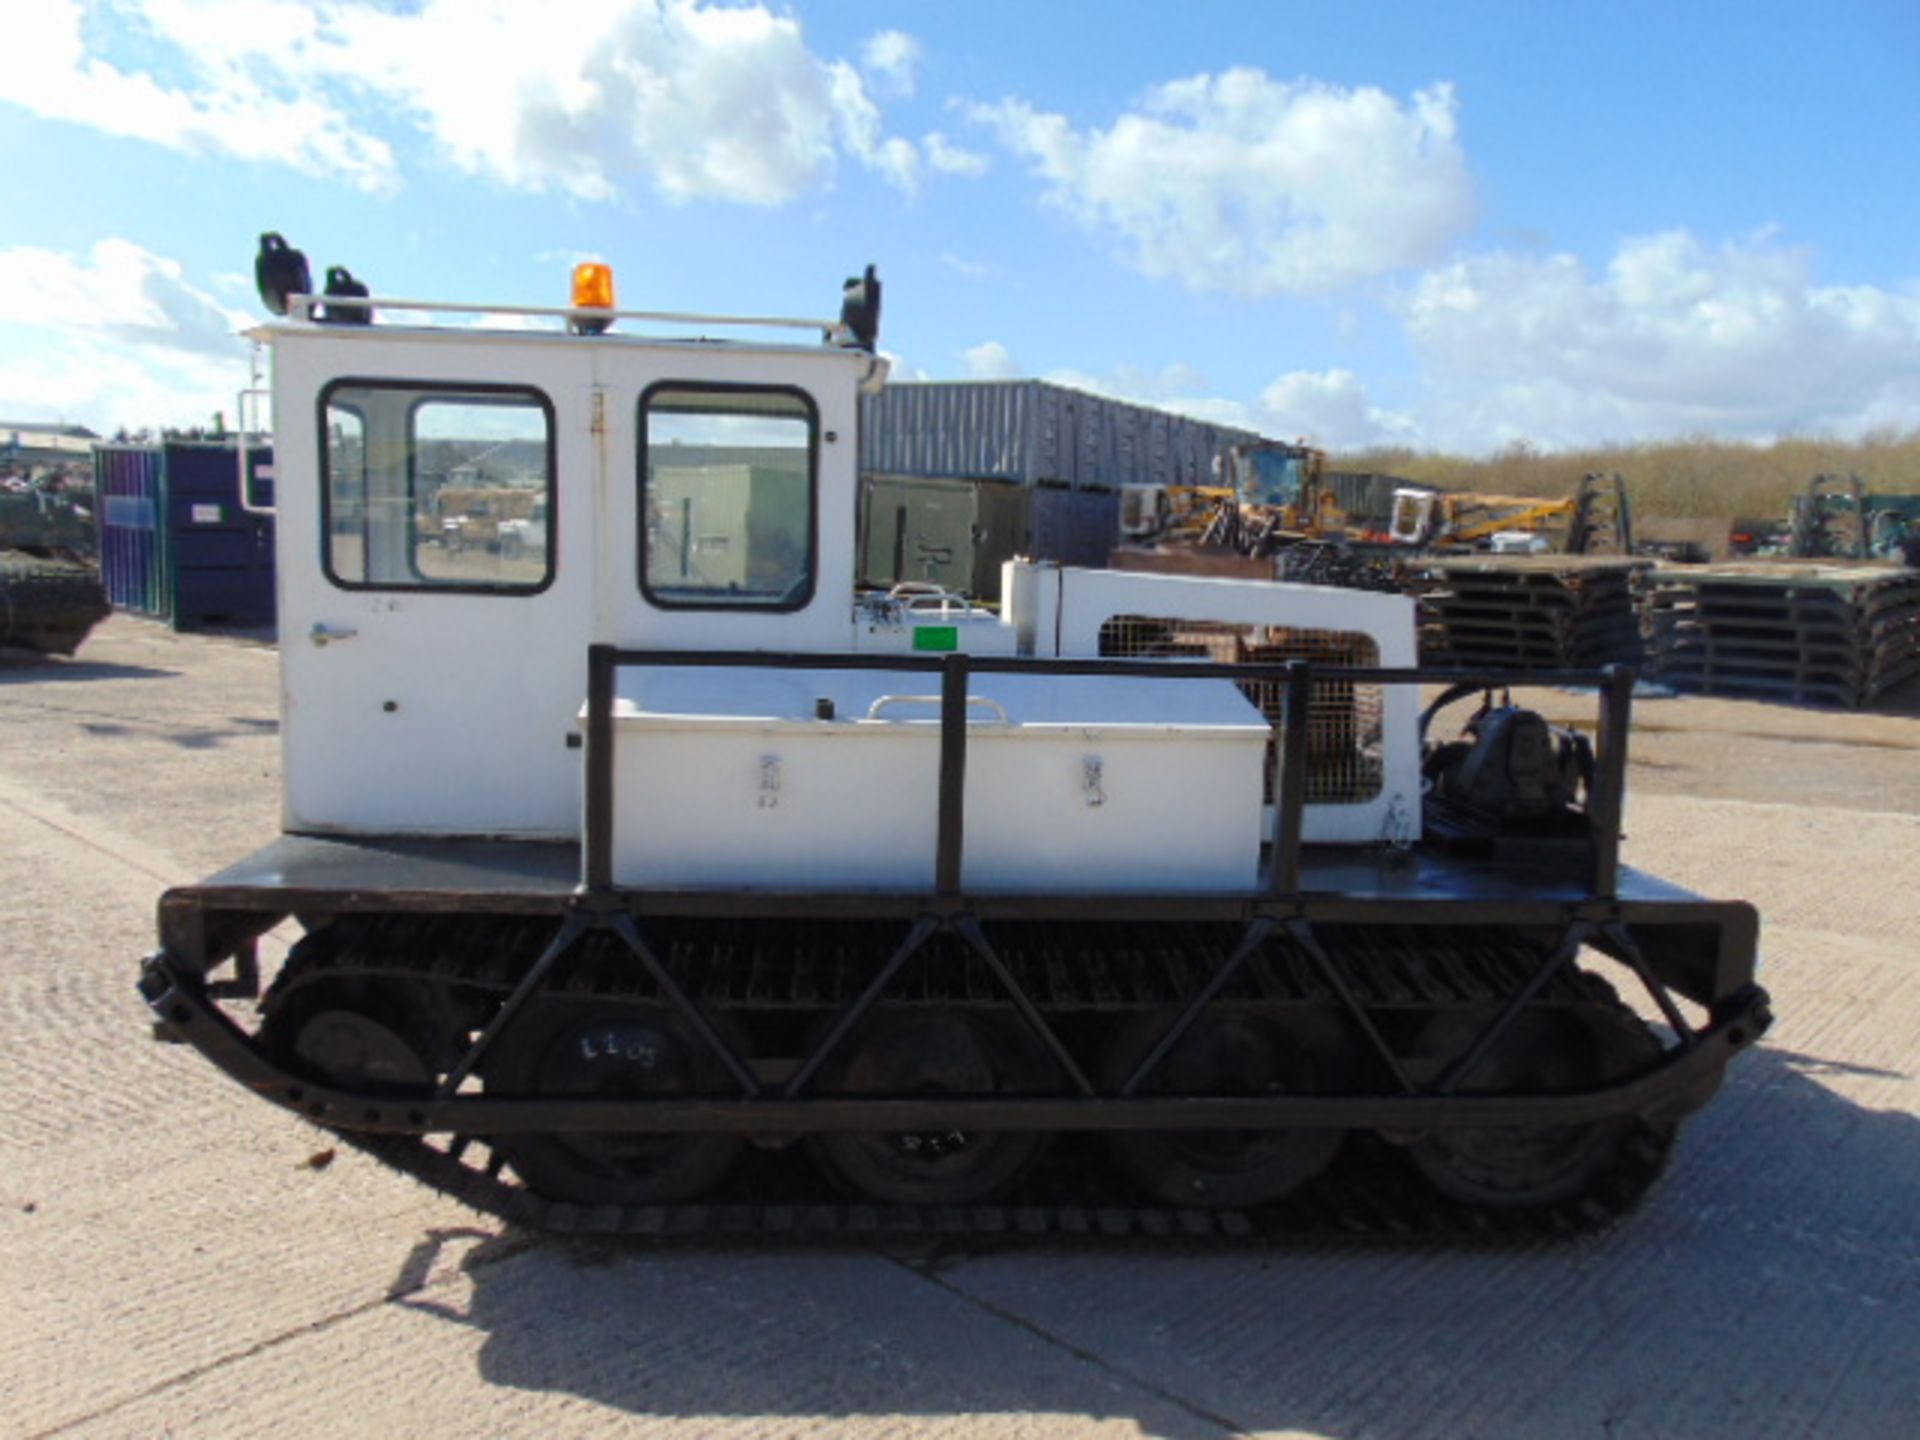 Rolba Bombardier Muskeg MM 80 All Terrain Tracked Vehicle with Rear Mounted Boughton Winch - Image 4 of 32